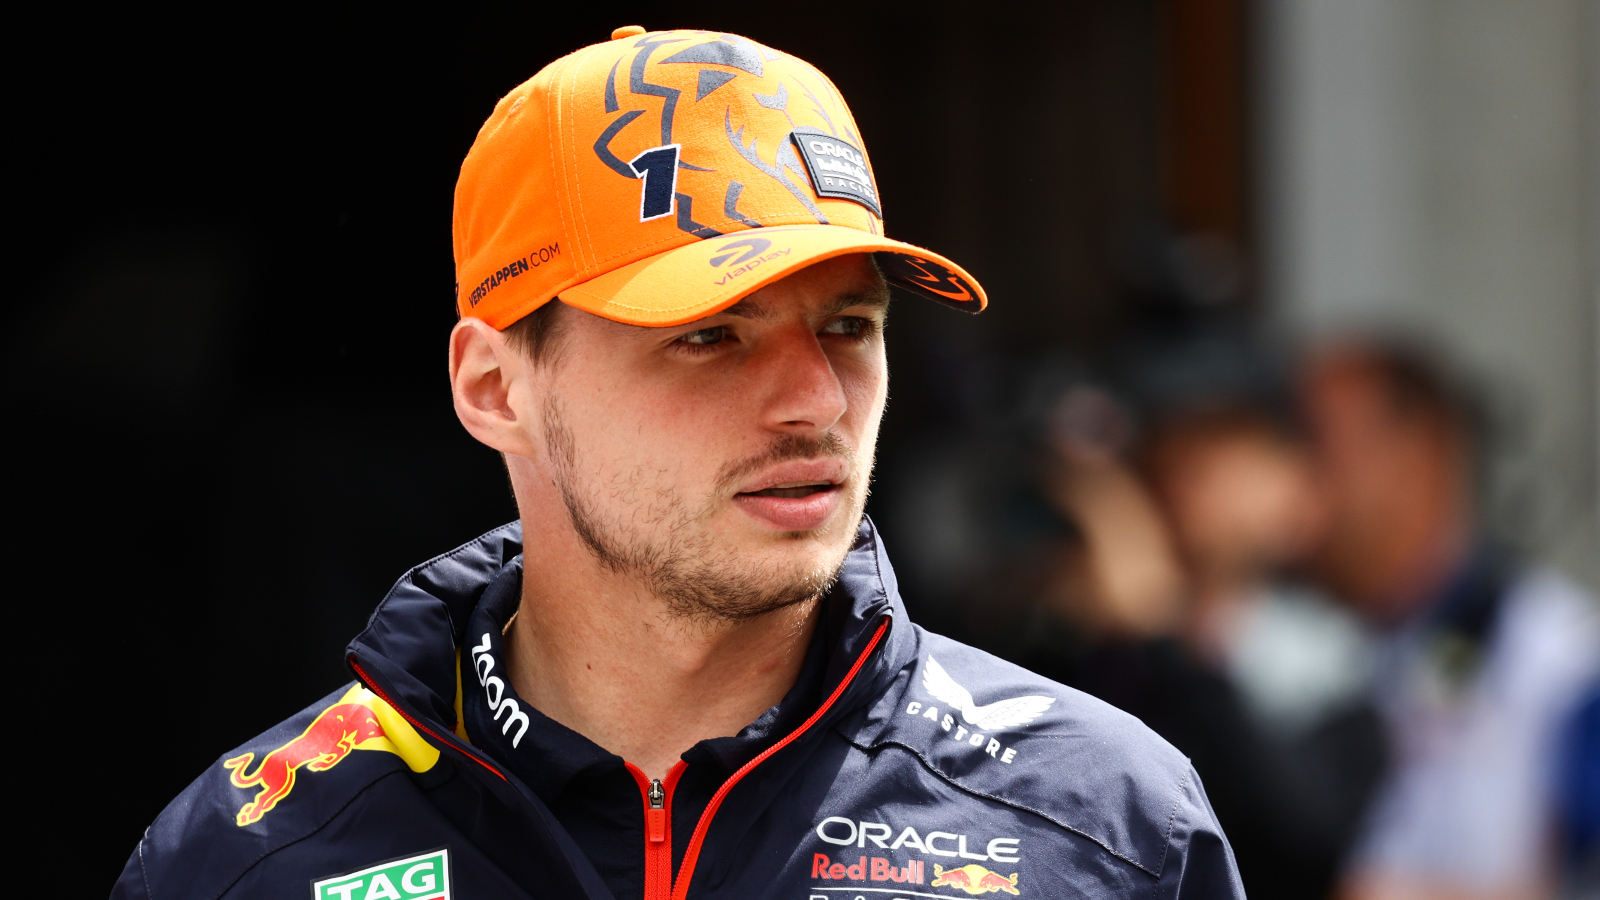 F1 Champ Max Verstappen Could Be In Trouble With French Police